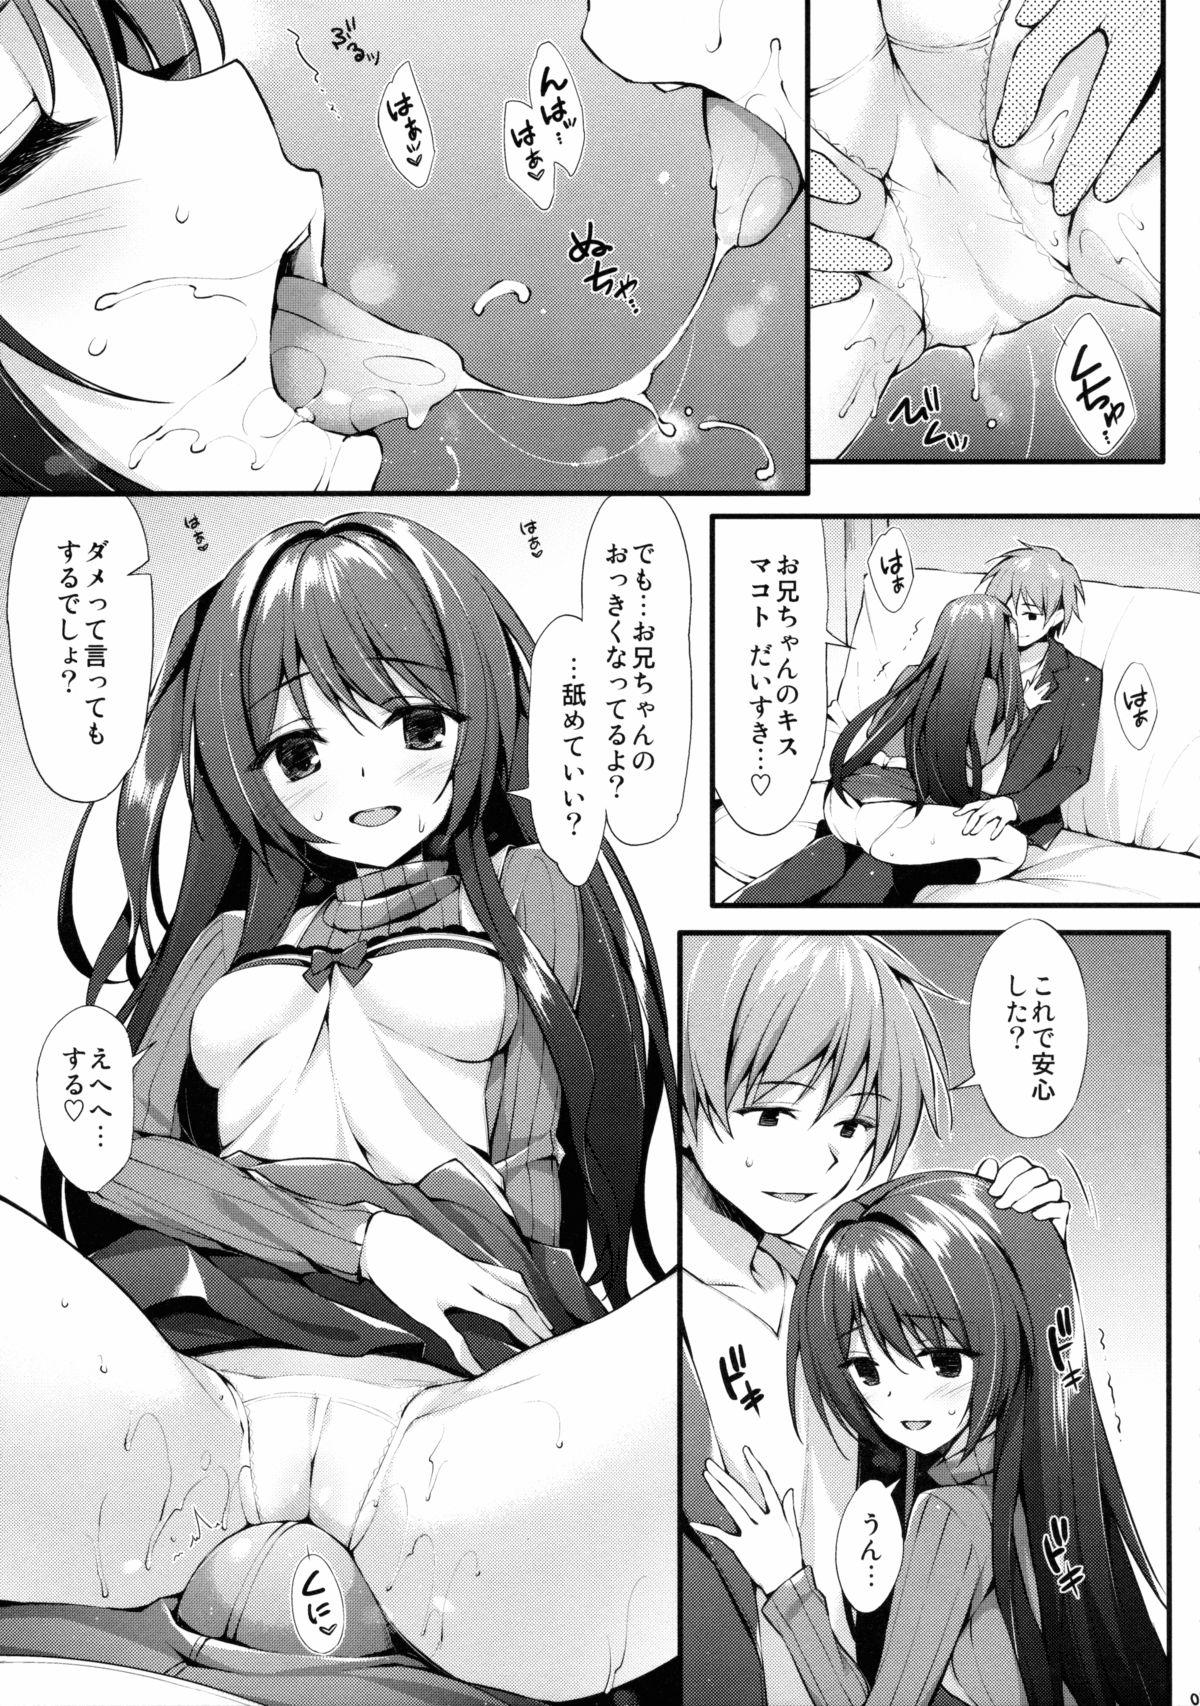 Booty (C89) [P:P (Oryou)] Onii-chan Senyou Makoto-chan (Tokyo 7th Sisters) - Tokyo 7th sisters Jerking Off - Page 6